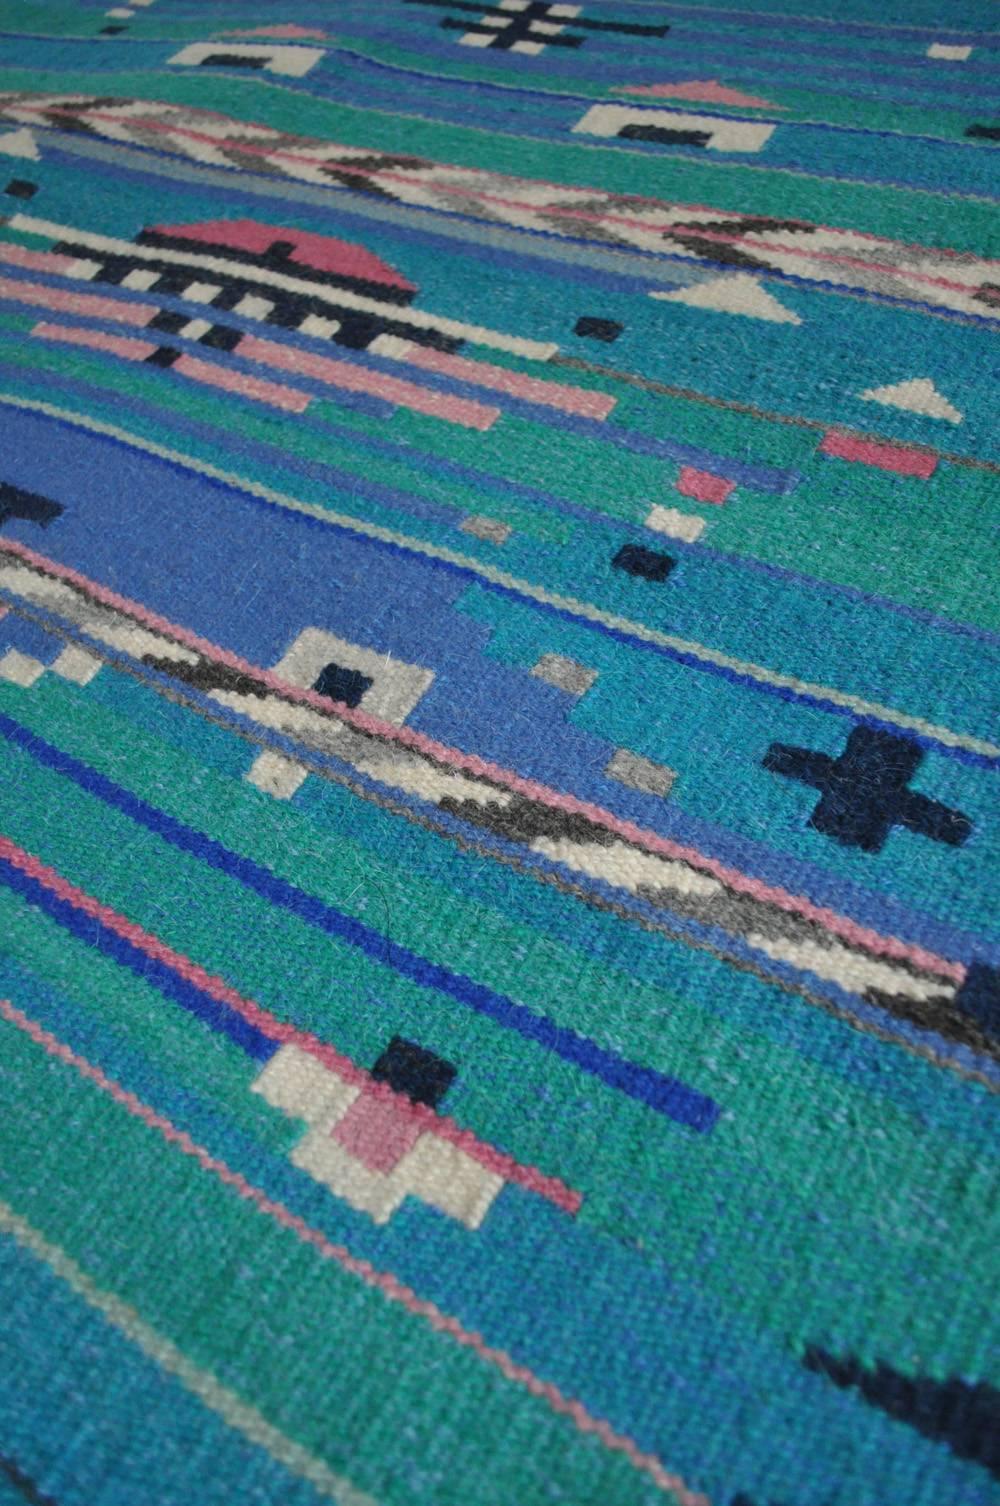 High quality handwoven tapestry from the late 1980s by the Danish artist Mette Birckner. 
Handwoven in wool. 

Excellent condition.

Measures: W 110 cm., H 125 cm

Nature is often the starting point for the painter and weaver Mette Birckner, but